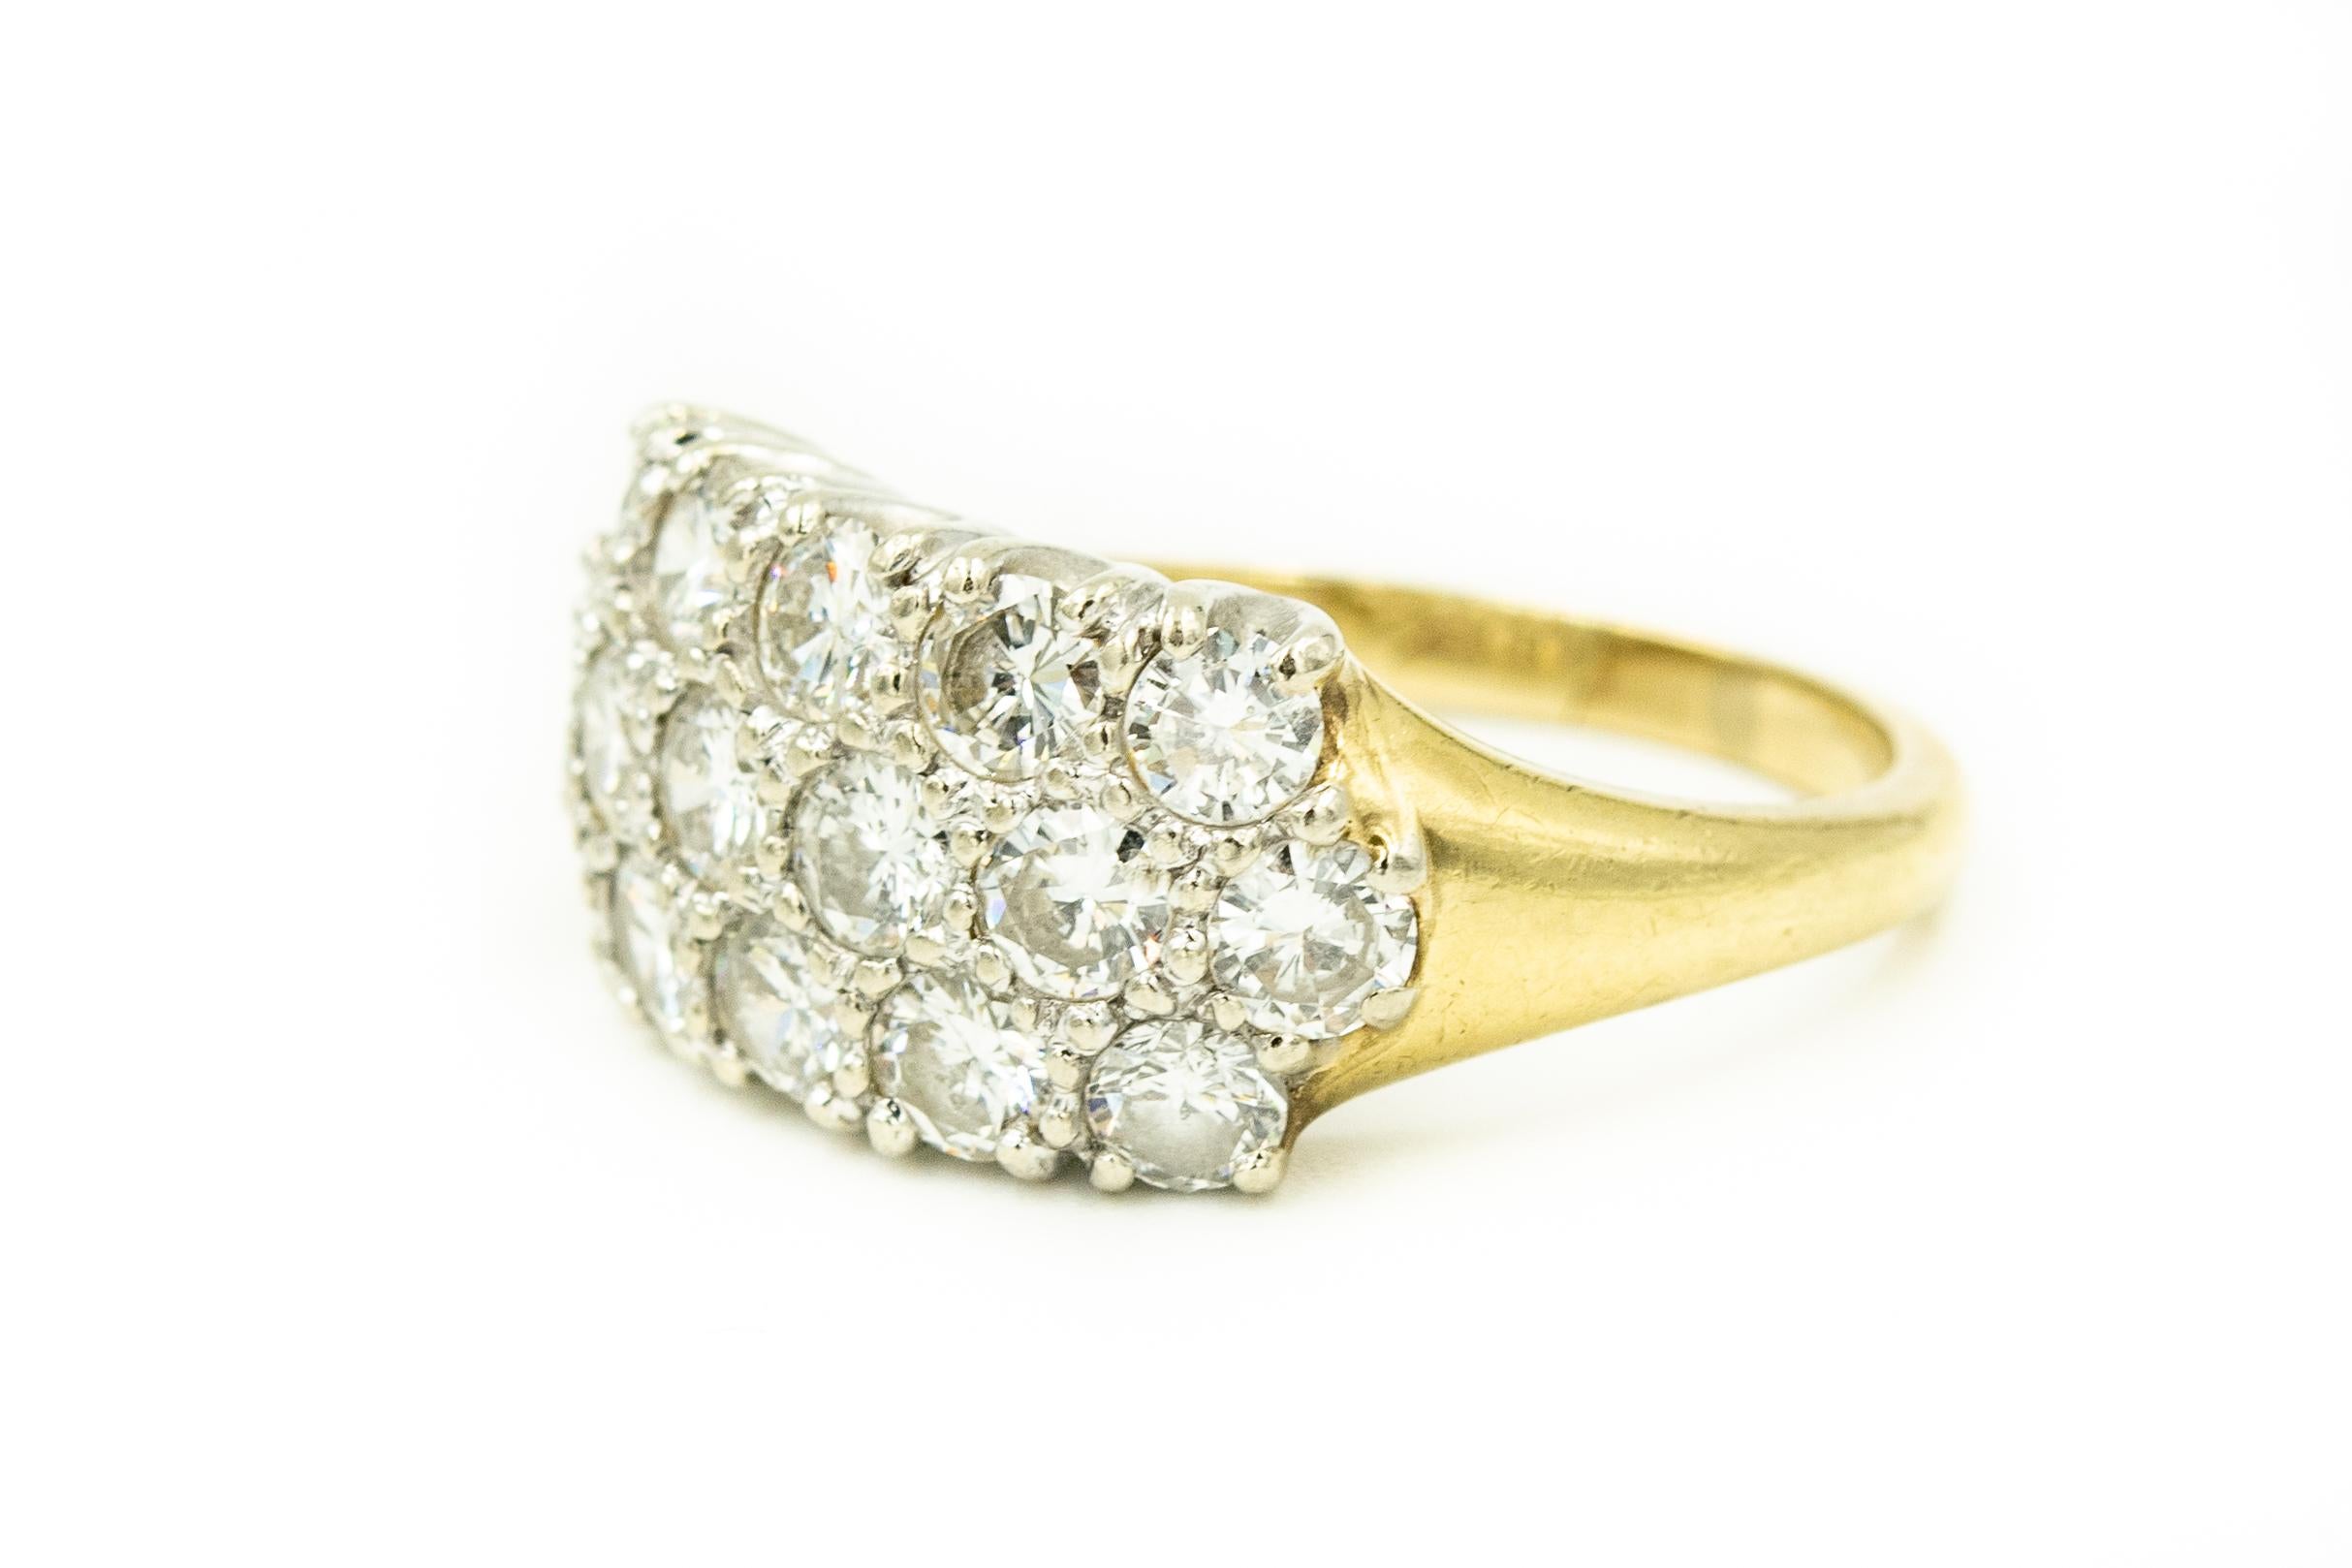 Nicely made diamond ring containing  3 rows of diamonds -  16 stones weighting approximately .15 carats each for an approximate total weight of 2.40 carats.  The stones are set in 14k white gold and the rest of the band is 14k yellow gold.

It is a